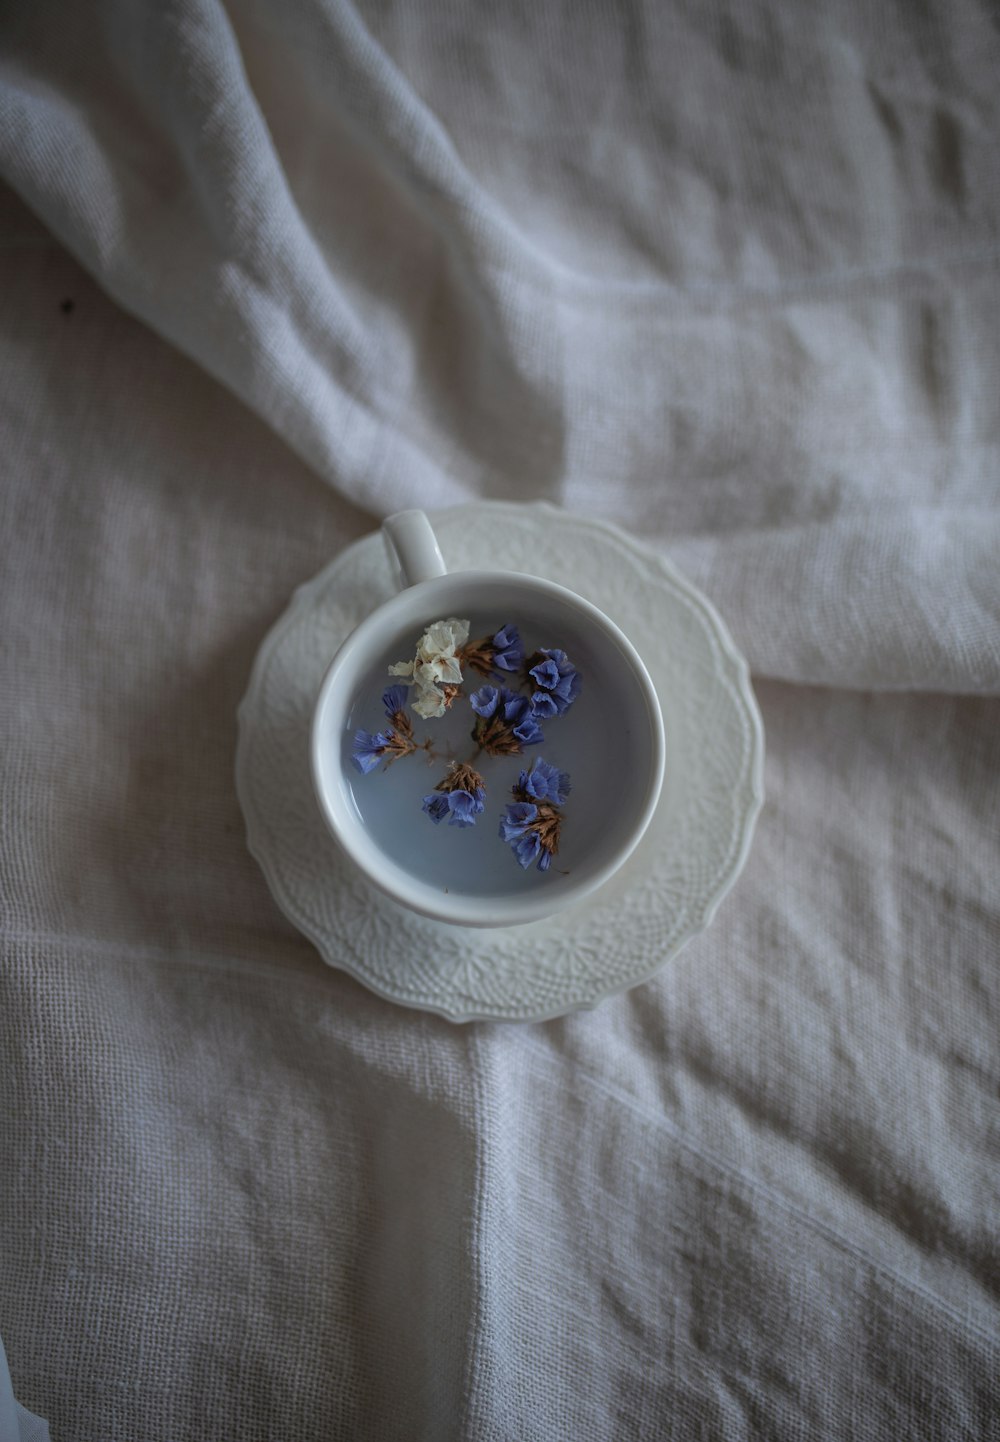 white and blue floral ceramic teacup on white textile